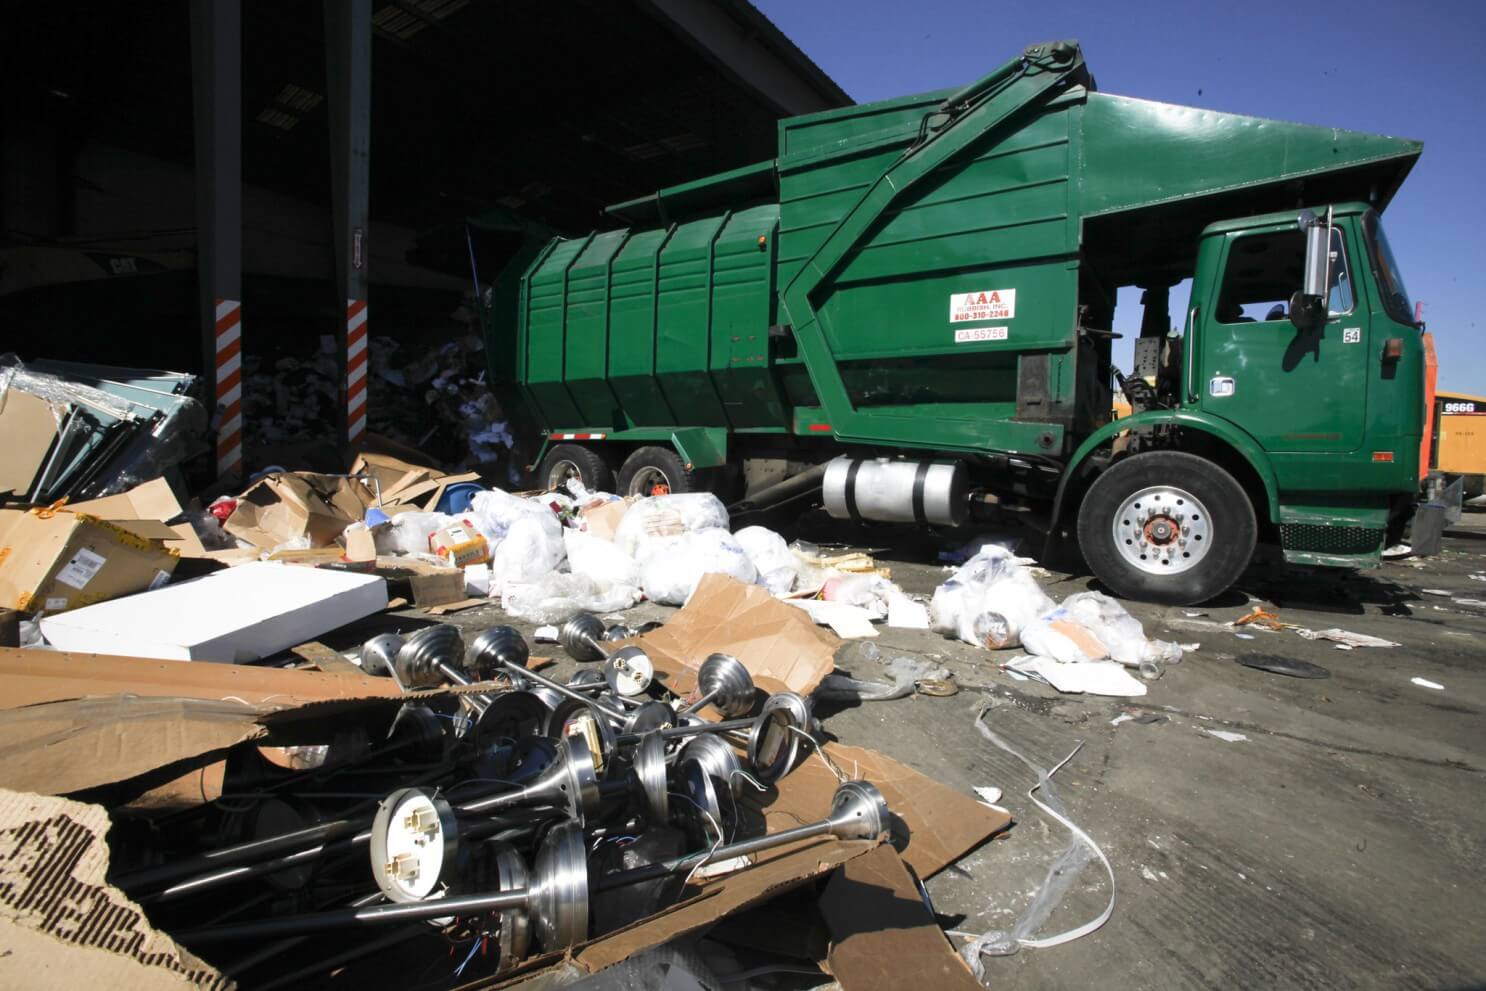 Trash Hauling-Palm Beach County’s Best Dumpster Removal Services-We Offer Residential and Commercial Dumpster Removal Services, Dumpster Rentals, Bulk Trash, Demolition Removal, Junk Hauling, Rubbish Removal, Waste Containers, Debris Removal, 10 Yard Containers, 15 Yard to 20 Yard to 30 Yard to 40 Yard Container Rentals, and much more!